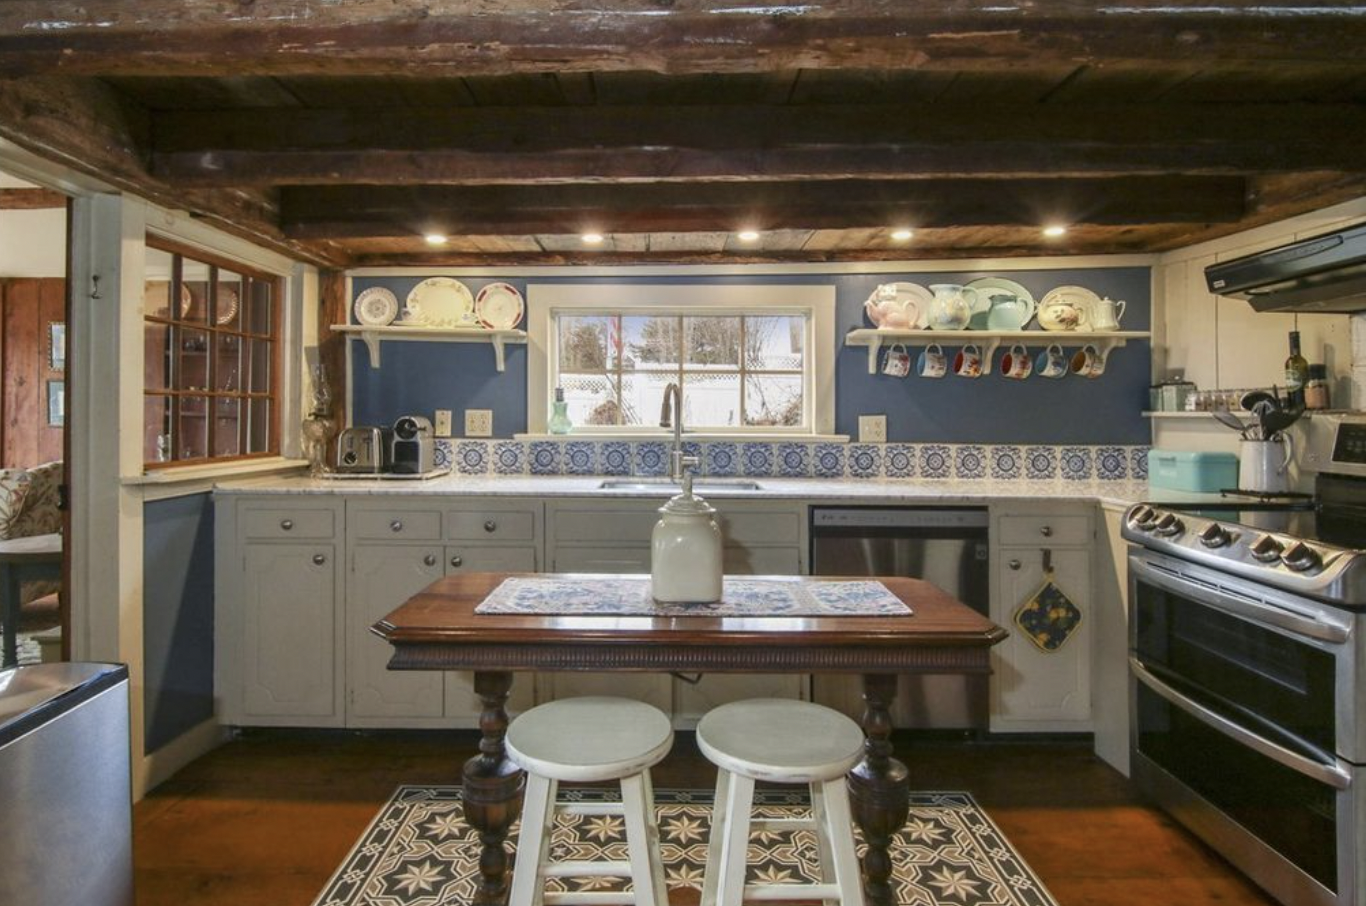 Quintessential Waterfront home kitchen before renovation -- low ceilings with exposed wooden beams, old farmers kitchen style.